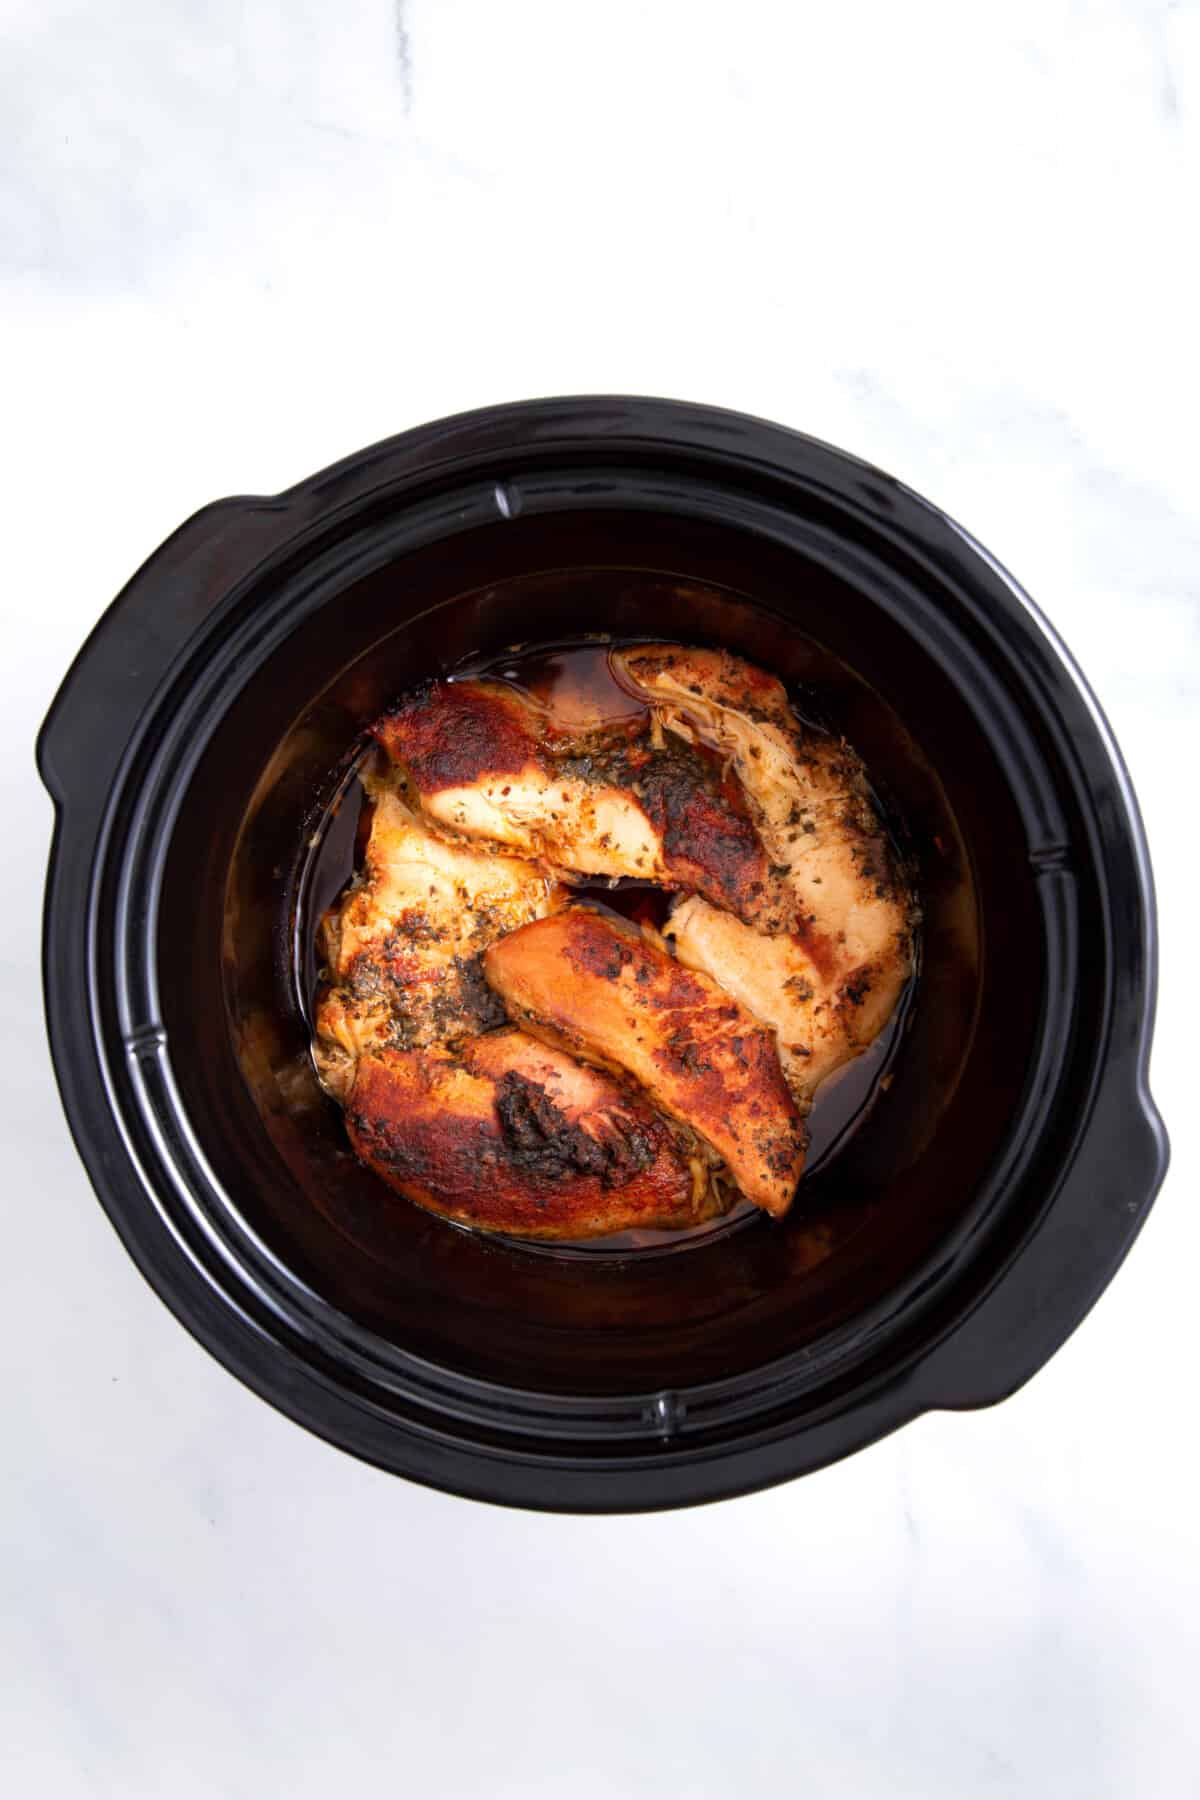 cooked chicken in a slow cooker.